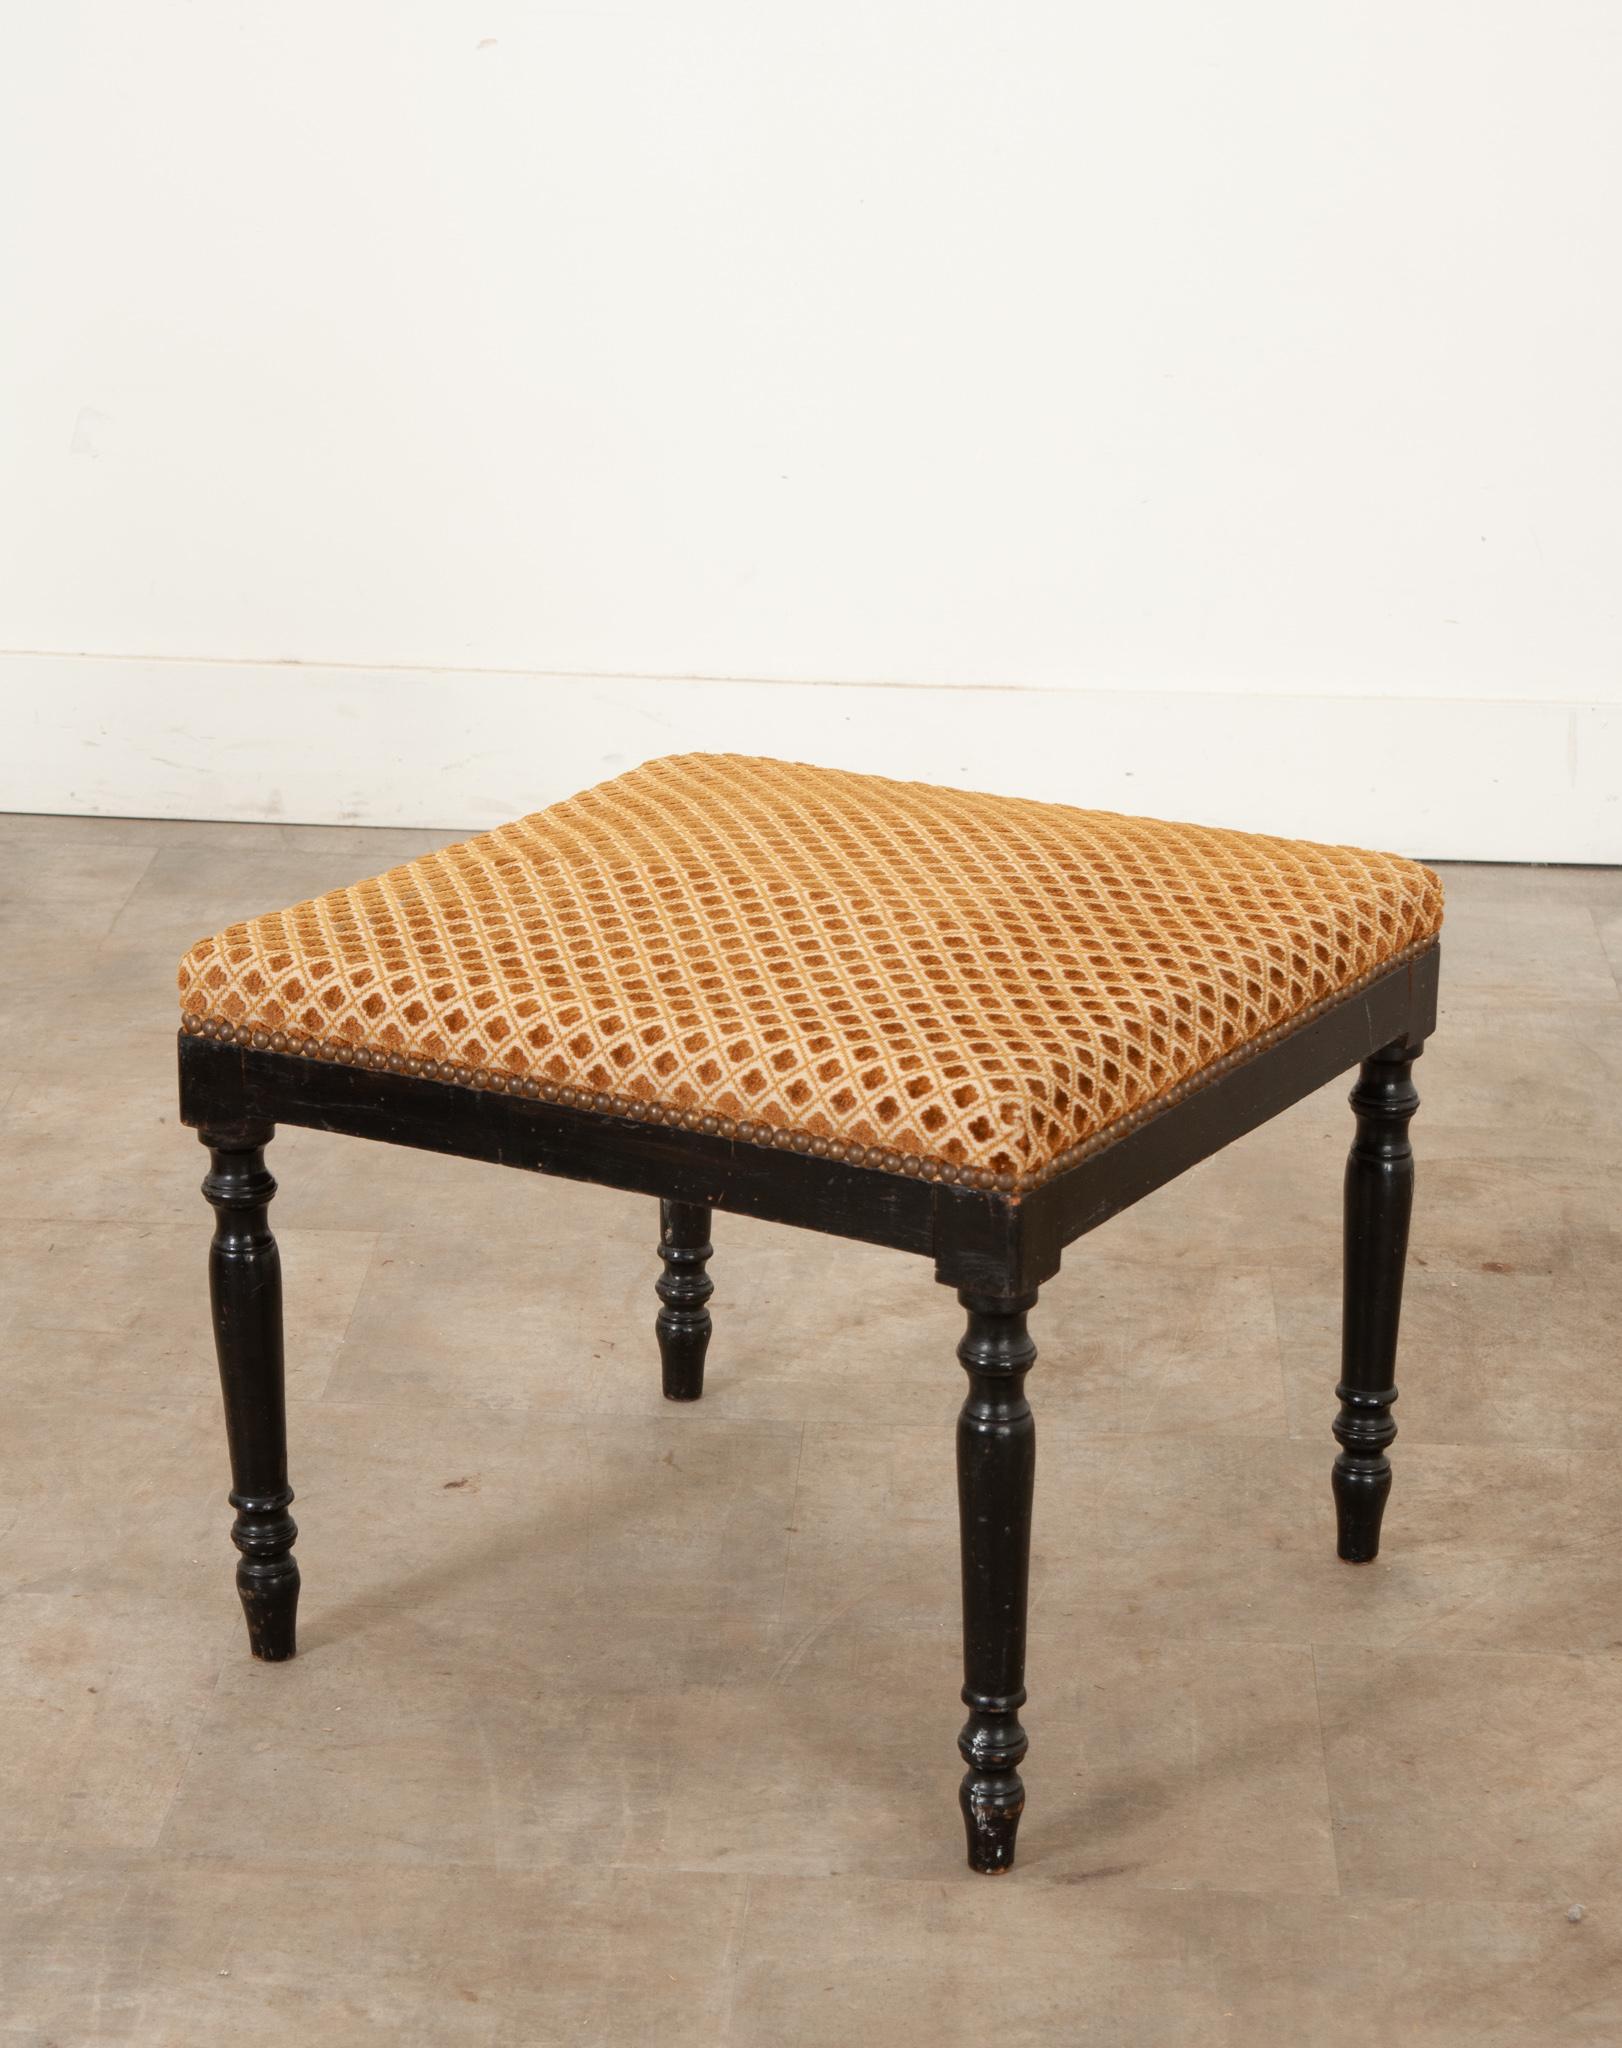 A lightweight square stool from the late 1800’s. The comfortable cushion is covered in cut velvet upholstery and has a diagonal quatrefoil design with nailhead trim. Raised on turned wood legs with an ebonized finish. Be sure to view the detailed